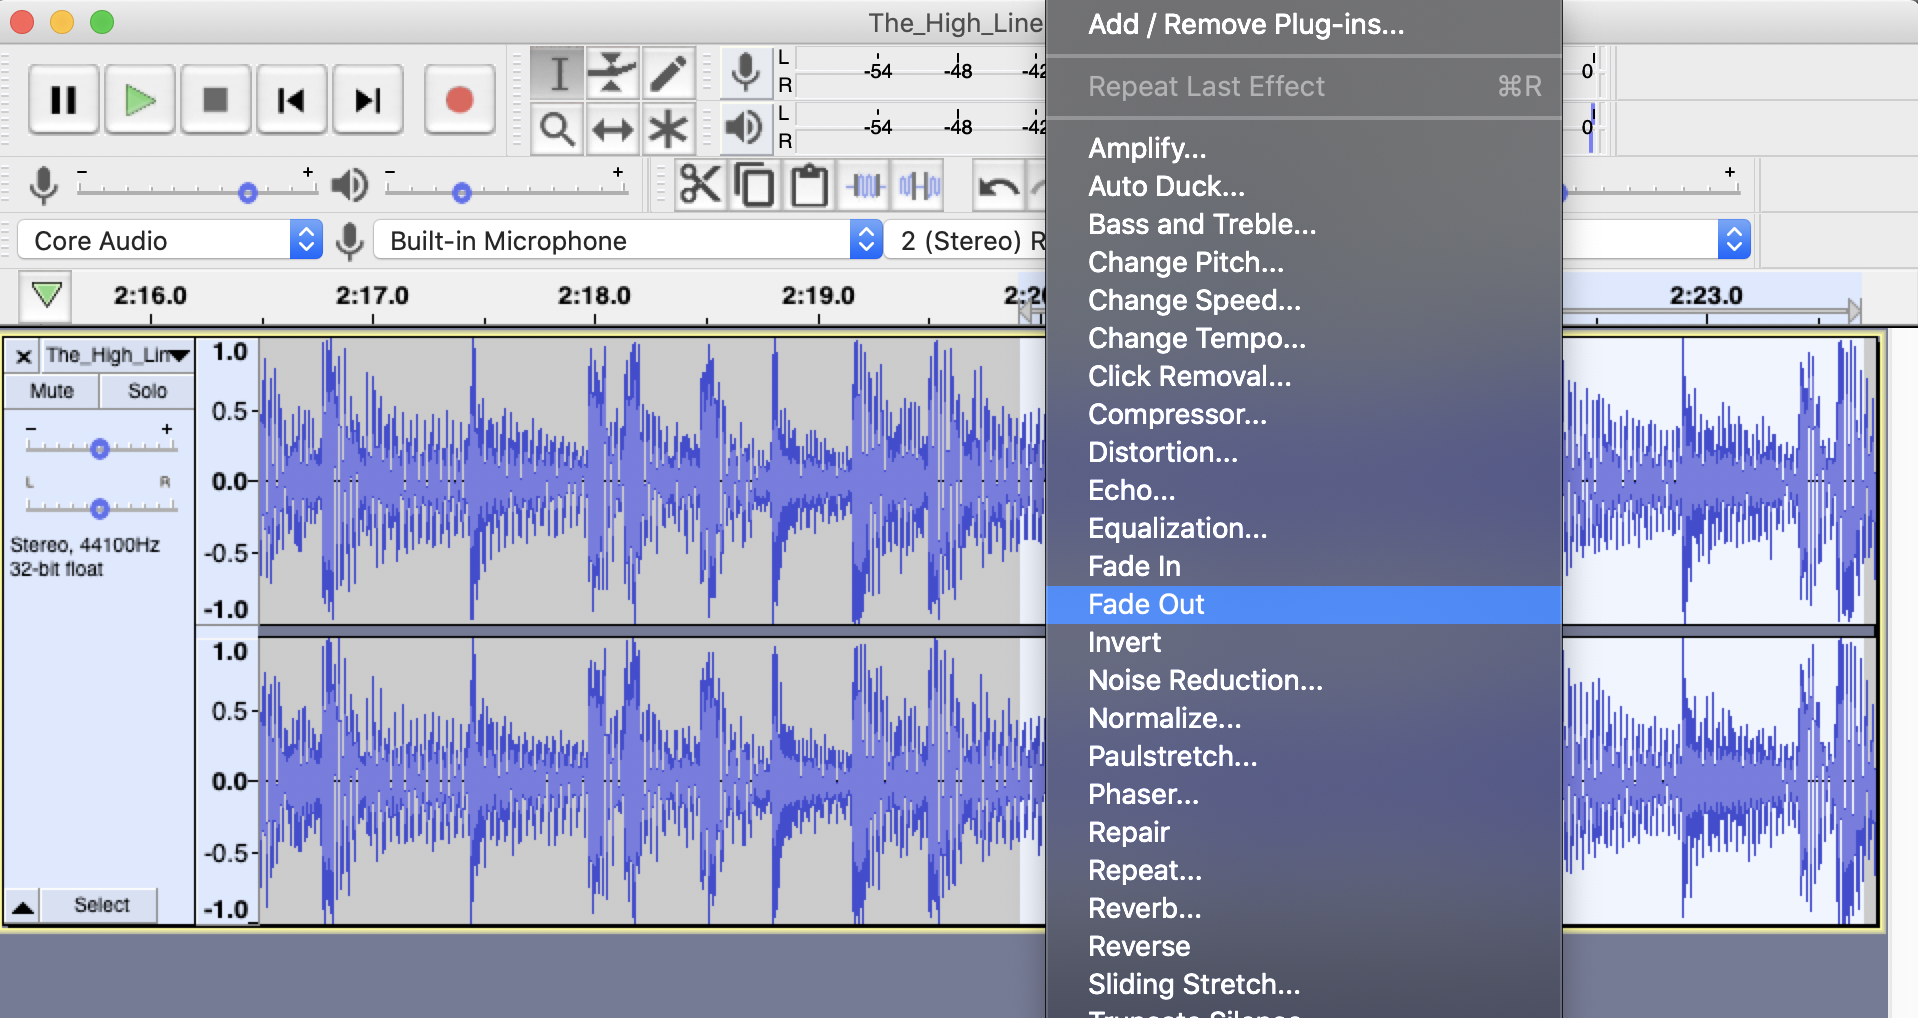 Audacity file with Fade Out effect selected